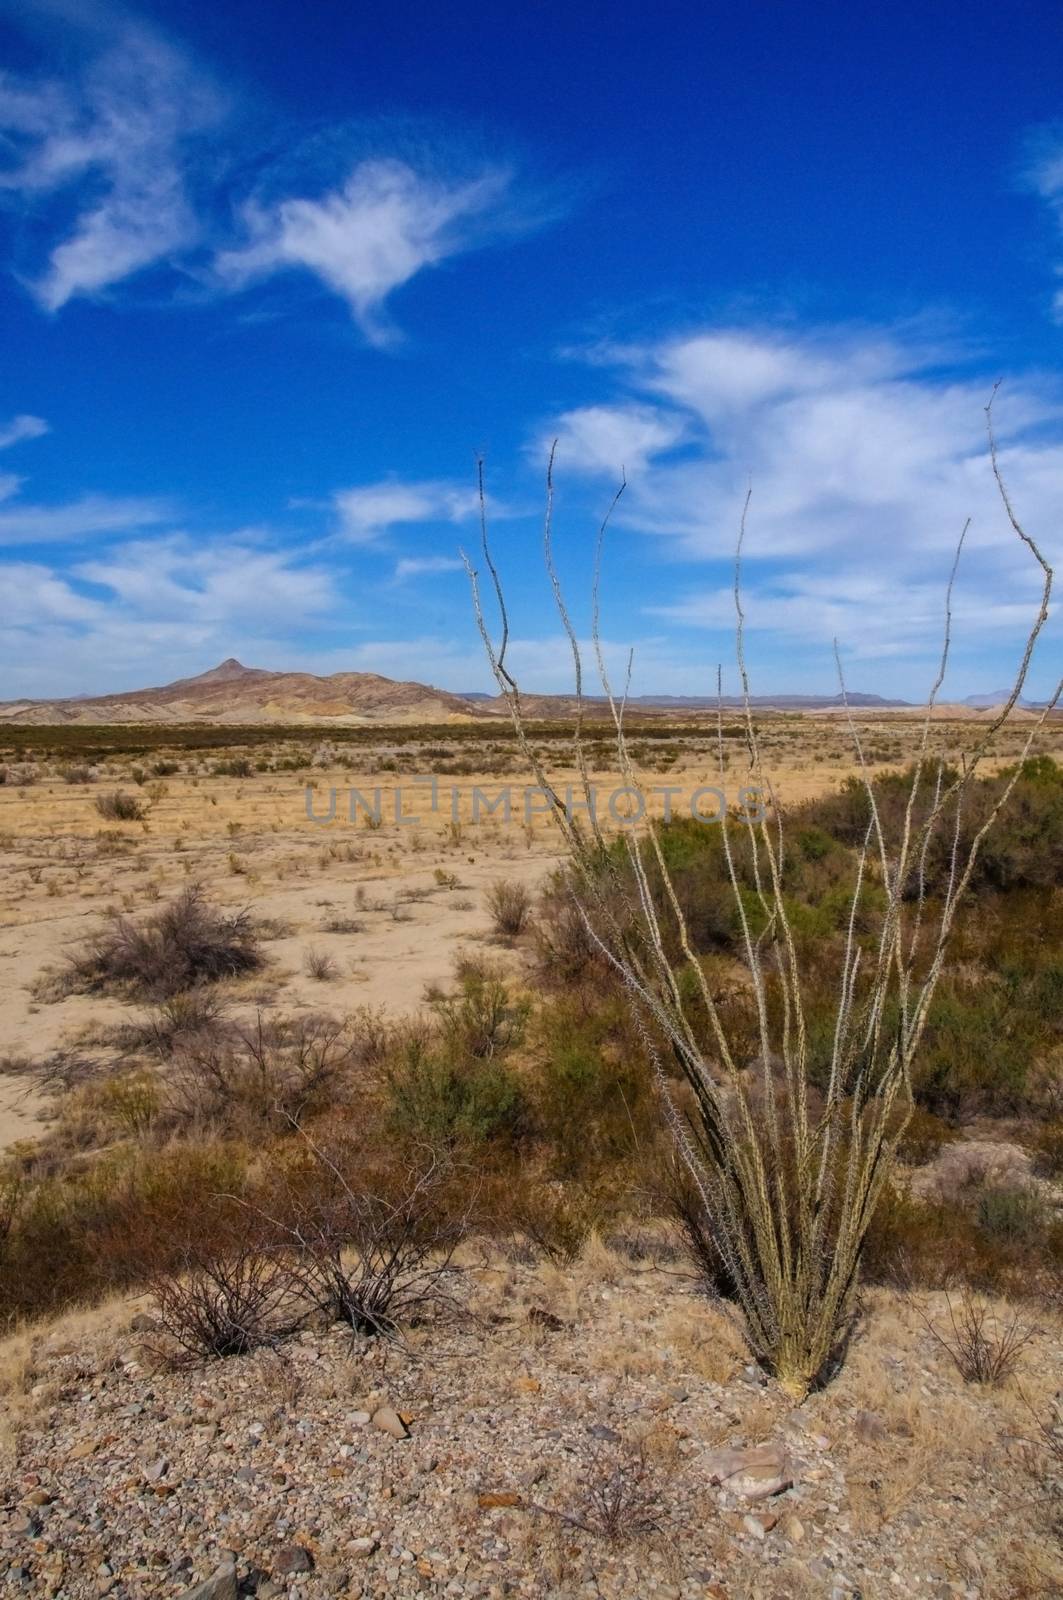 The ocotillo plant, Fouquieria splendens, in the Chihuahuan Dese by Hydrobiolog